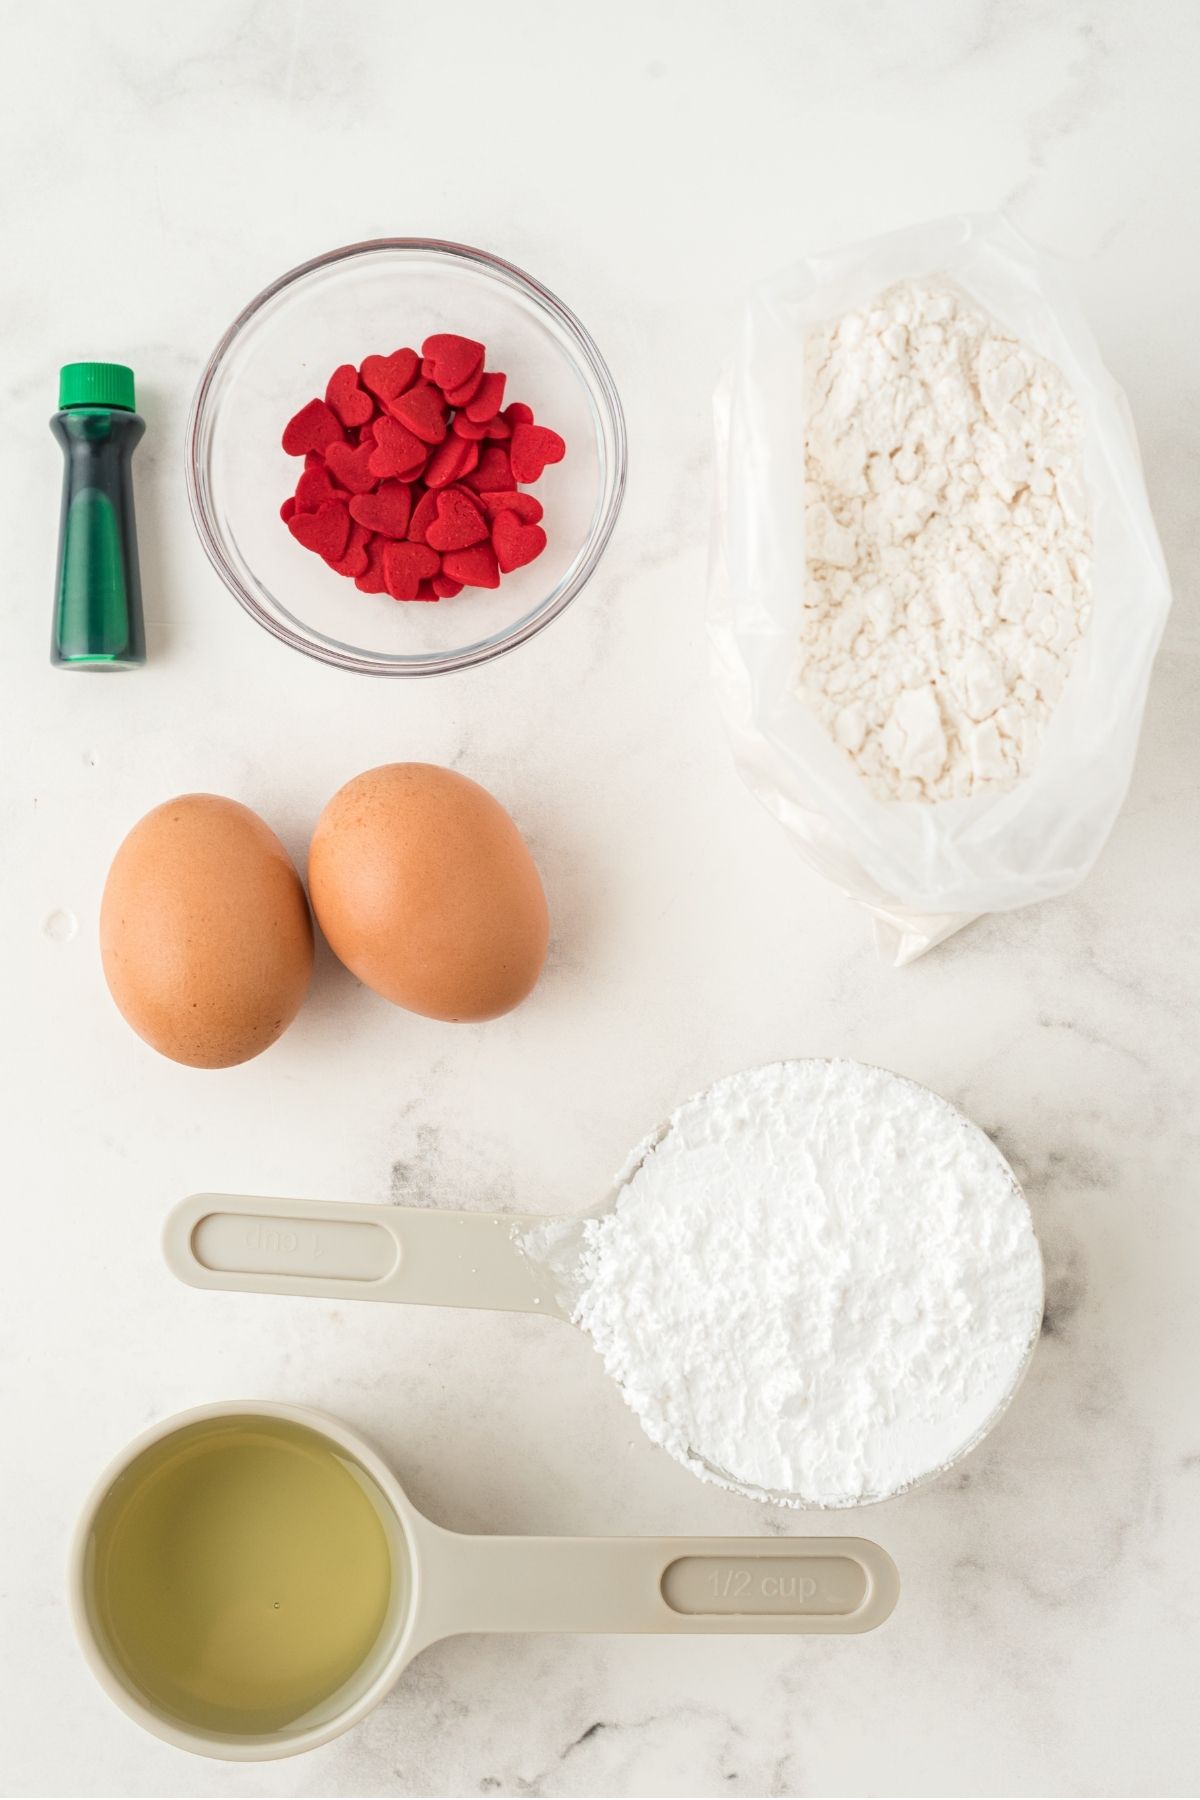 ingredients on white marble counter: green food coloring; red heart sprinkles; white cake mix; 2 brown eggs, confectioner's sugar, vegetable oil